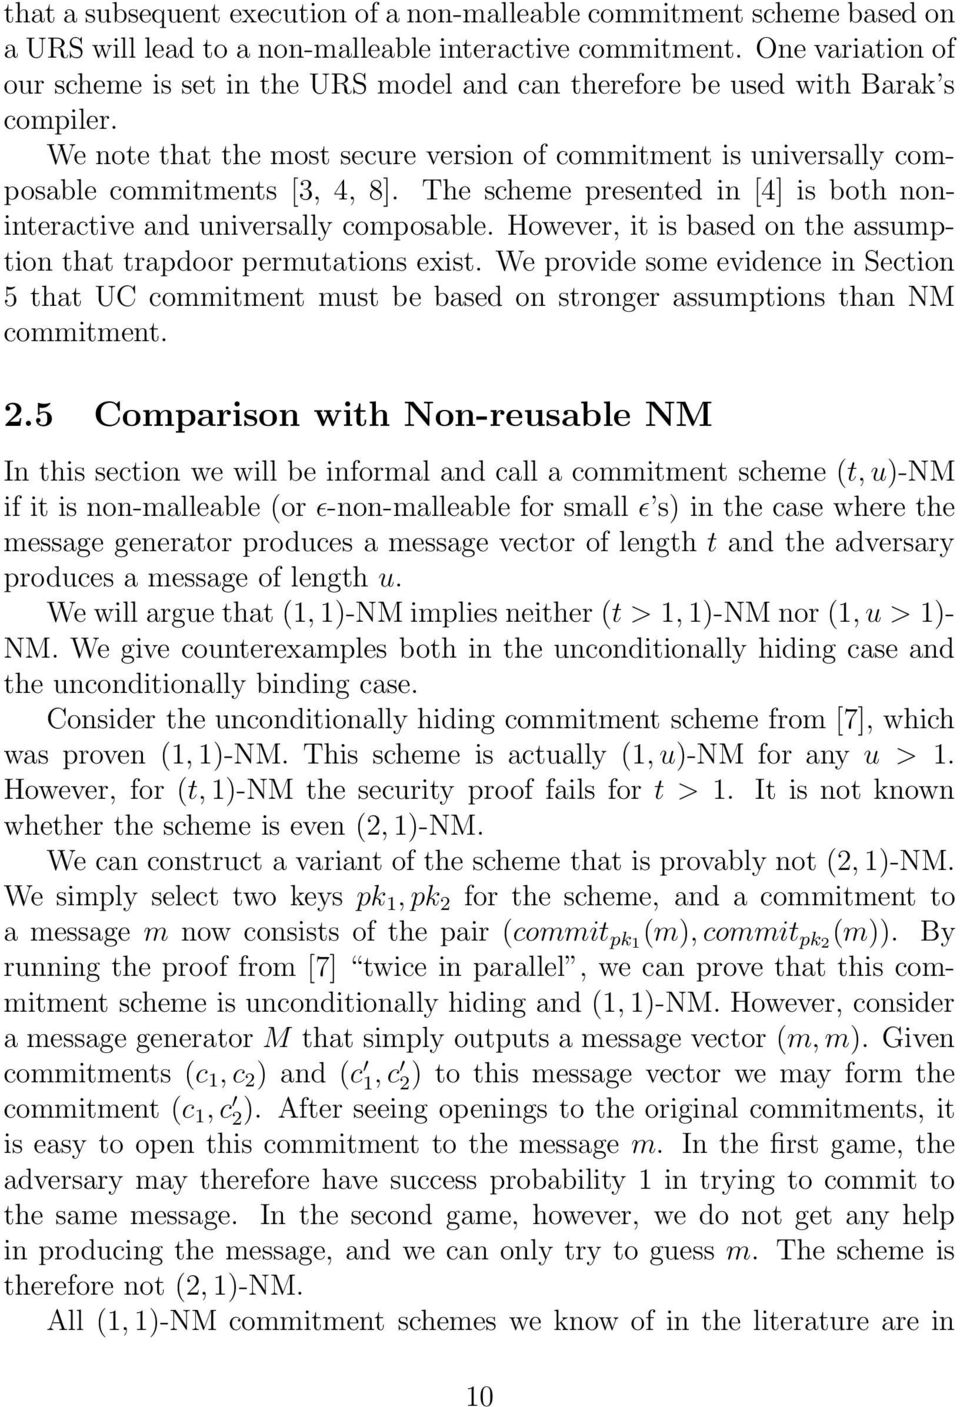 The scheme presented in [4] is both noninteractive and universally composable. However, it is based on the assumption that trapdoor permutations exist.